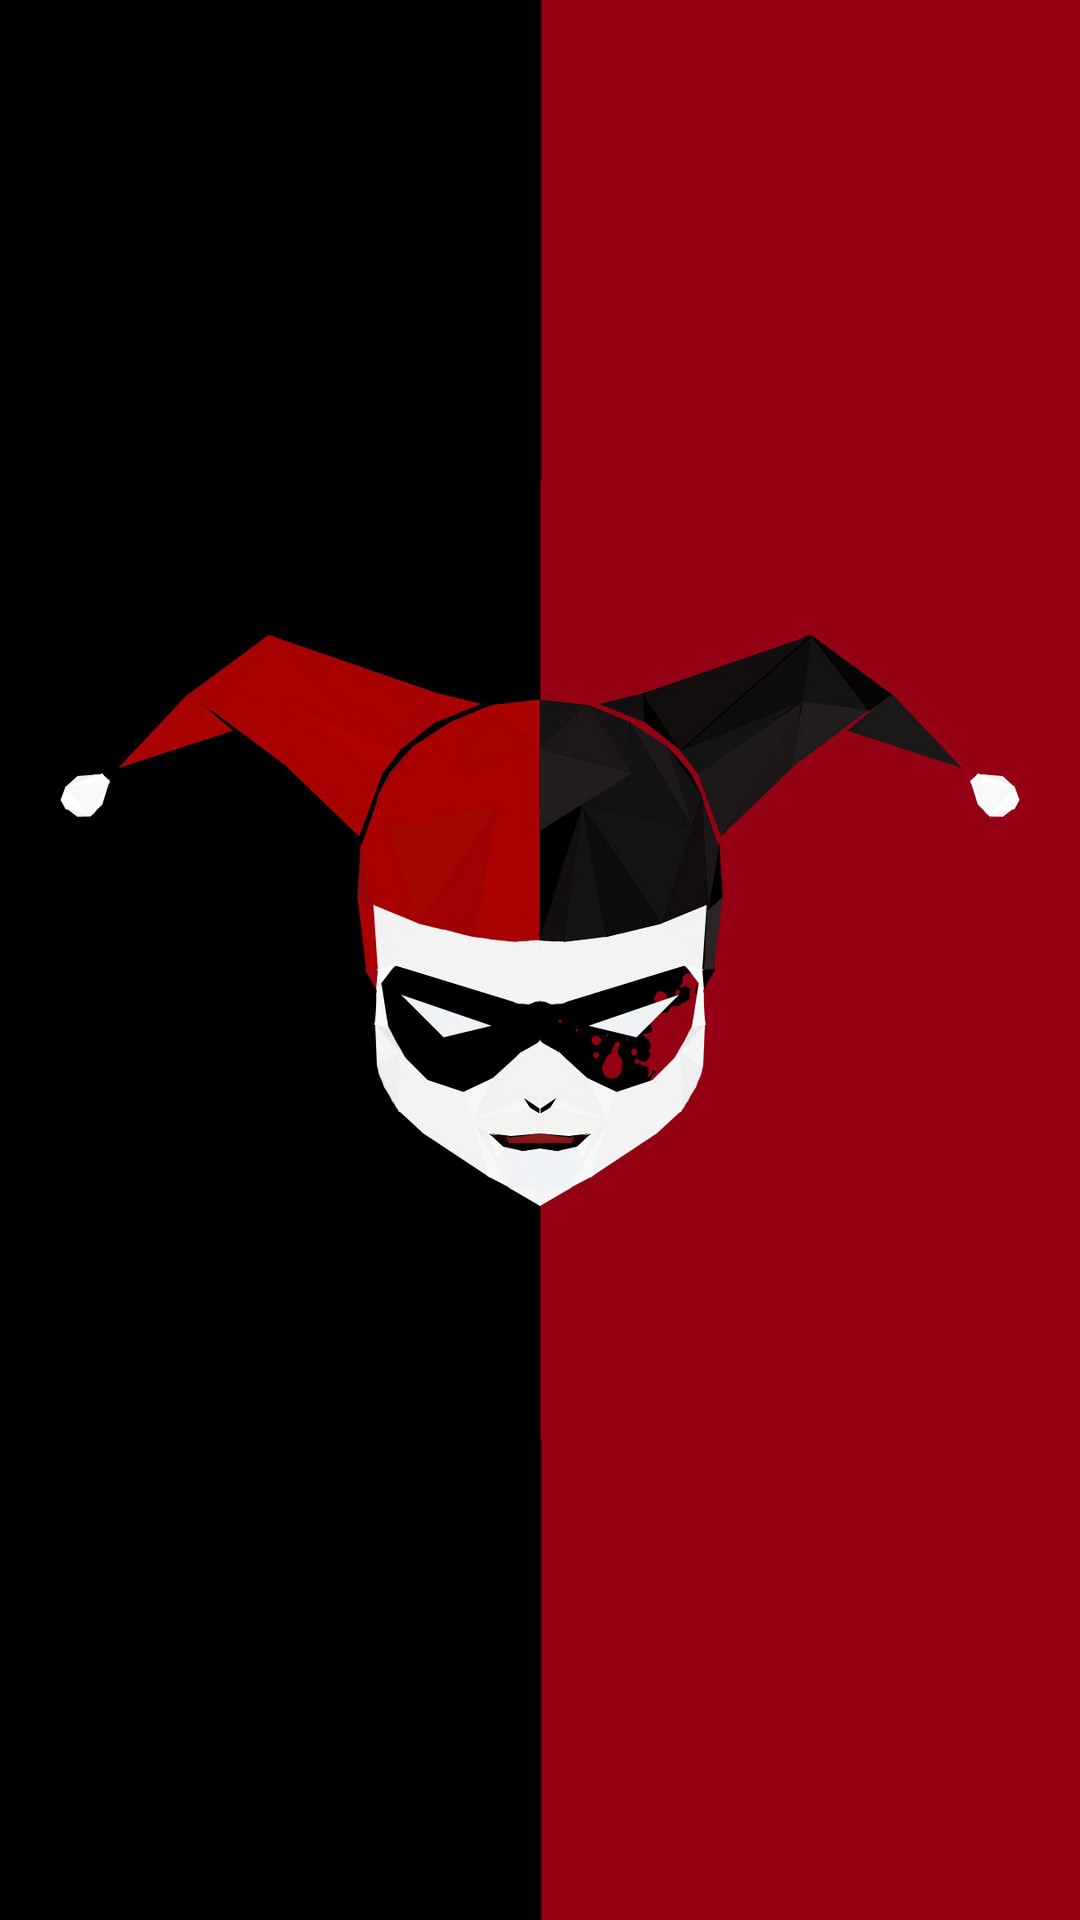 Harley Quinn Movie iPhone X Wallpaper with image resolution 1080x1920 pixel. You can use this wallpaper as background for your desktop Computer Screensavers, Android or iPhone smartphones